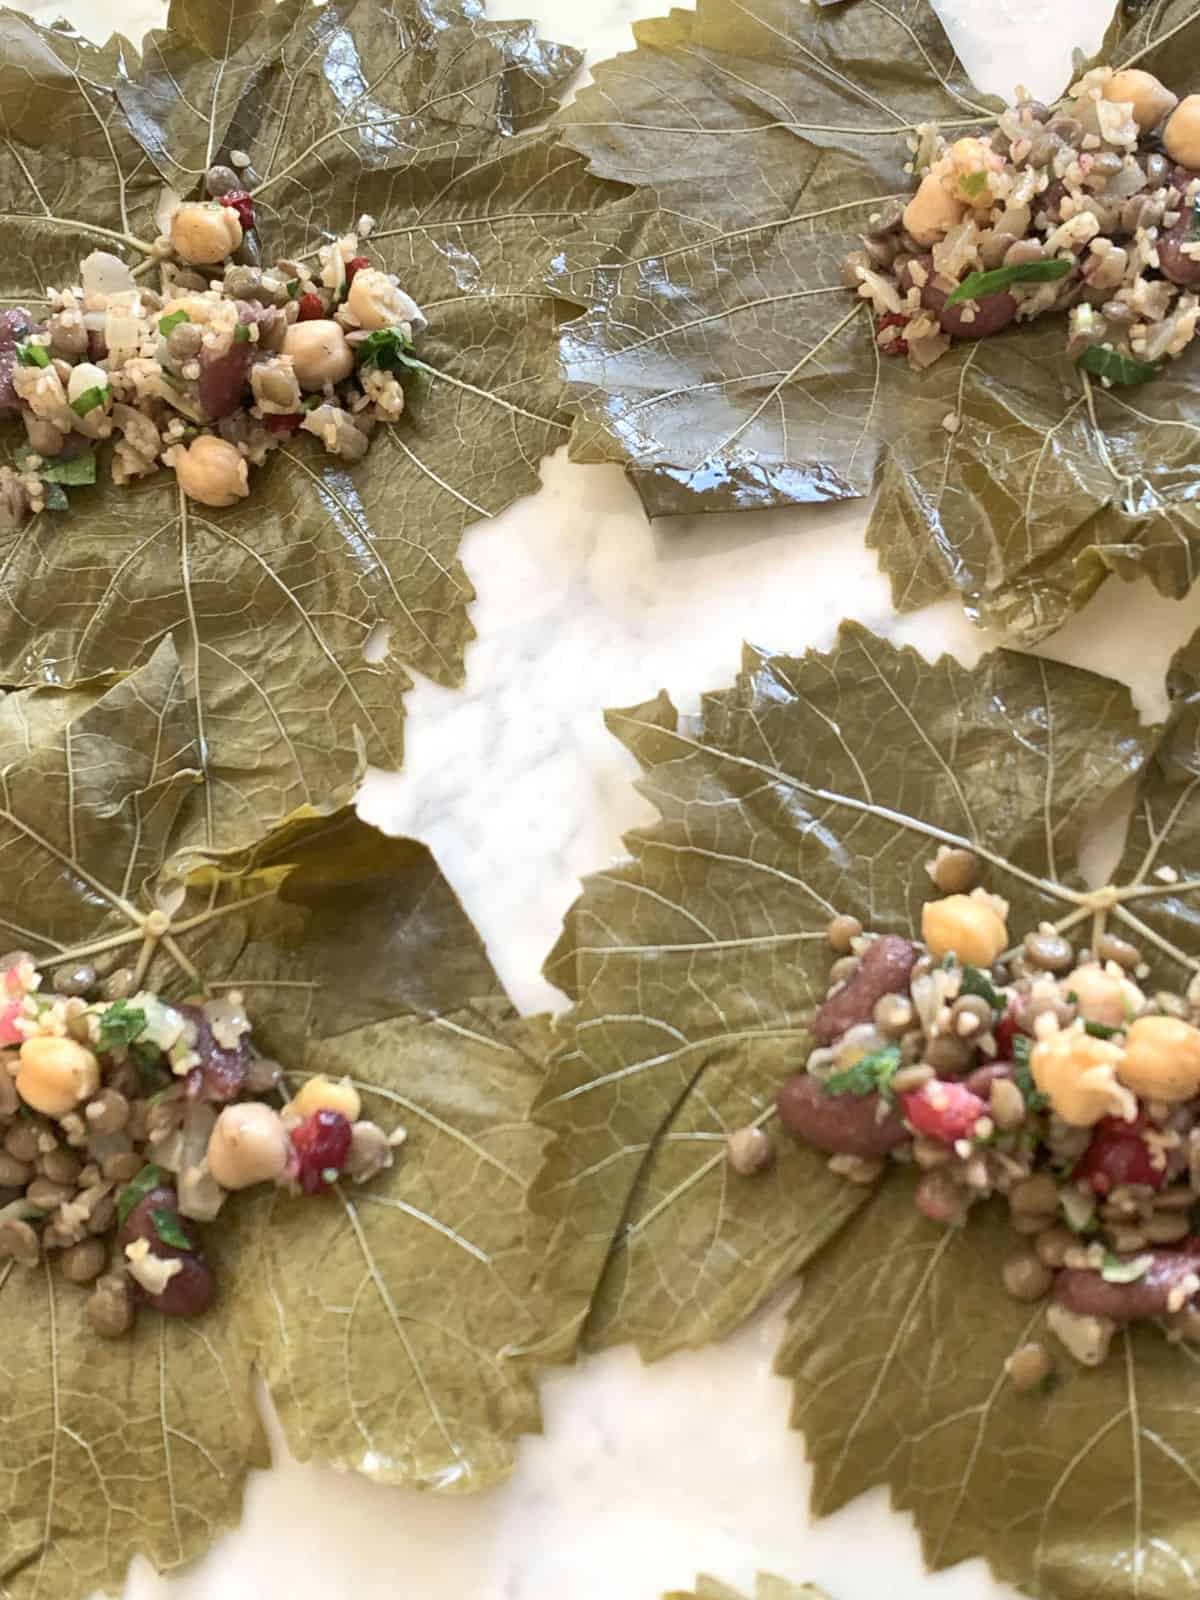 Grape leaves with bean stuffing ready to be rolled.